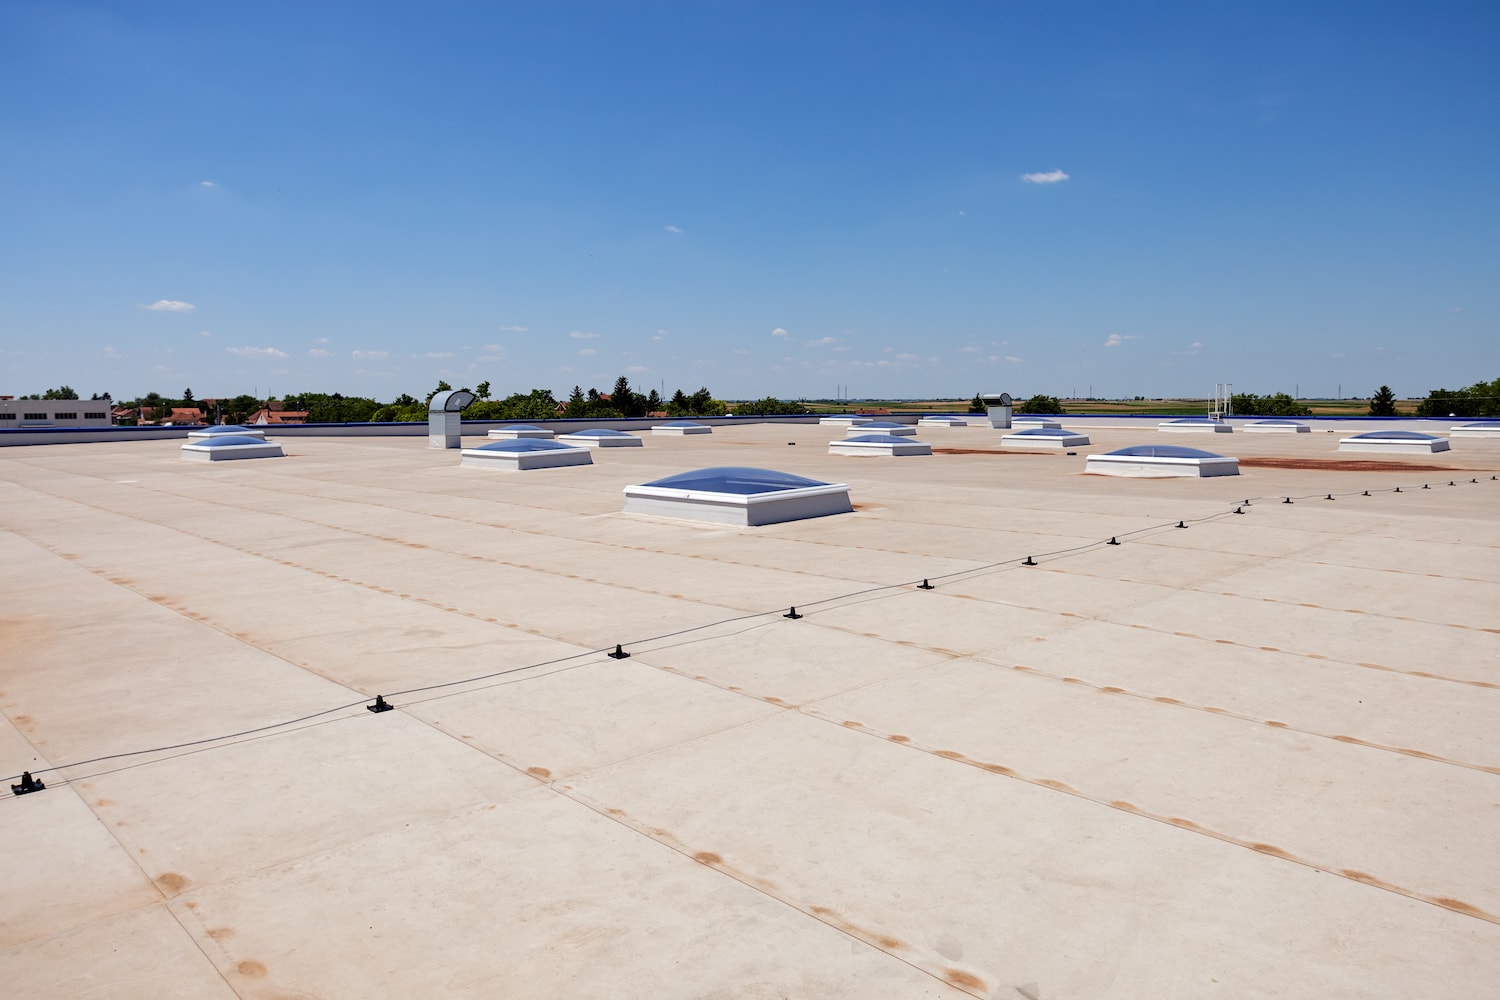 south lebanon commercial roofing vents and flat roof